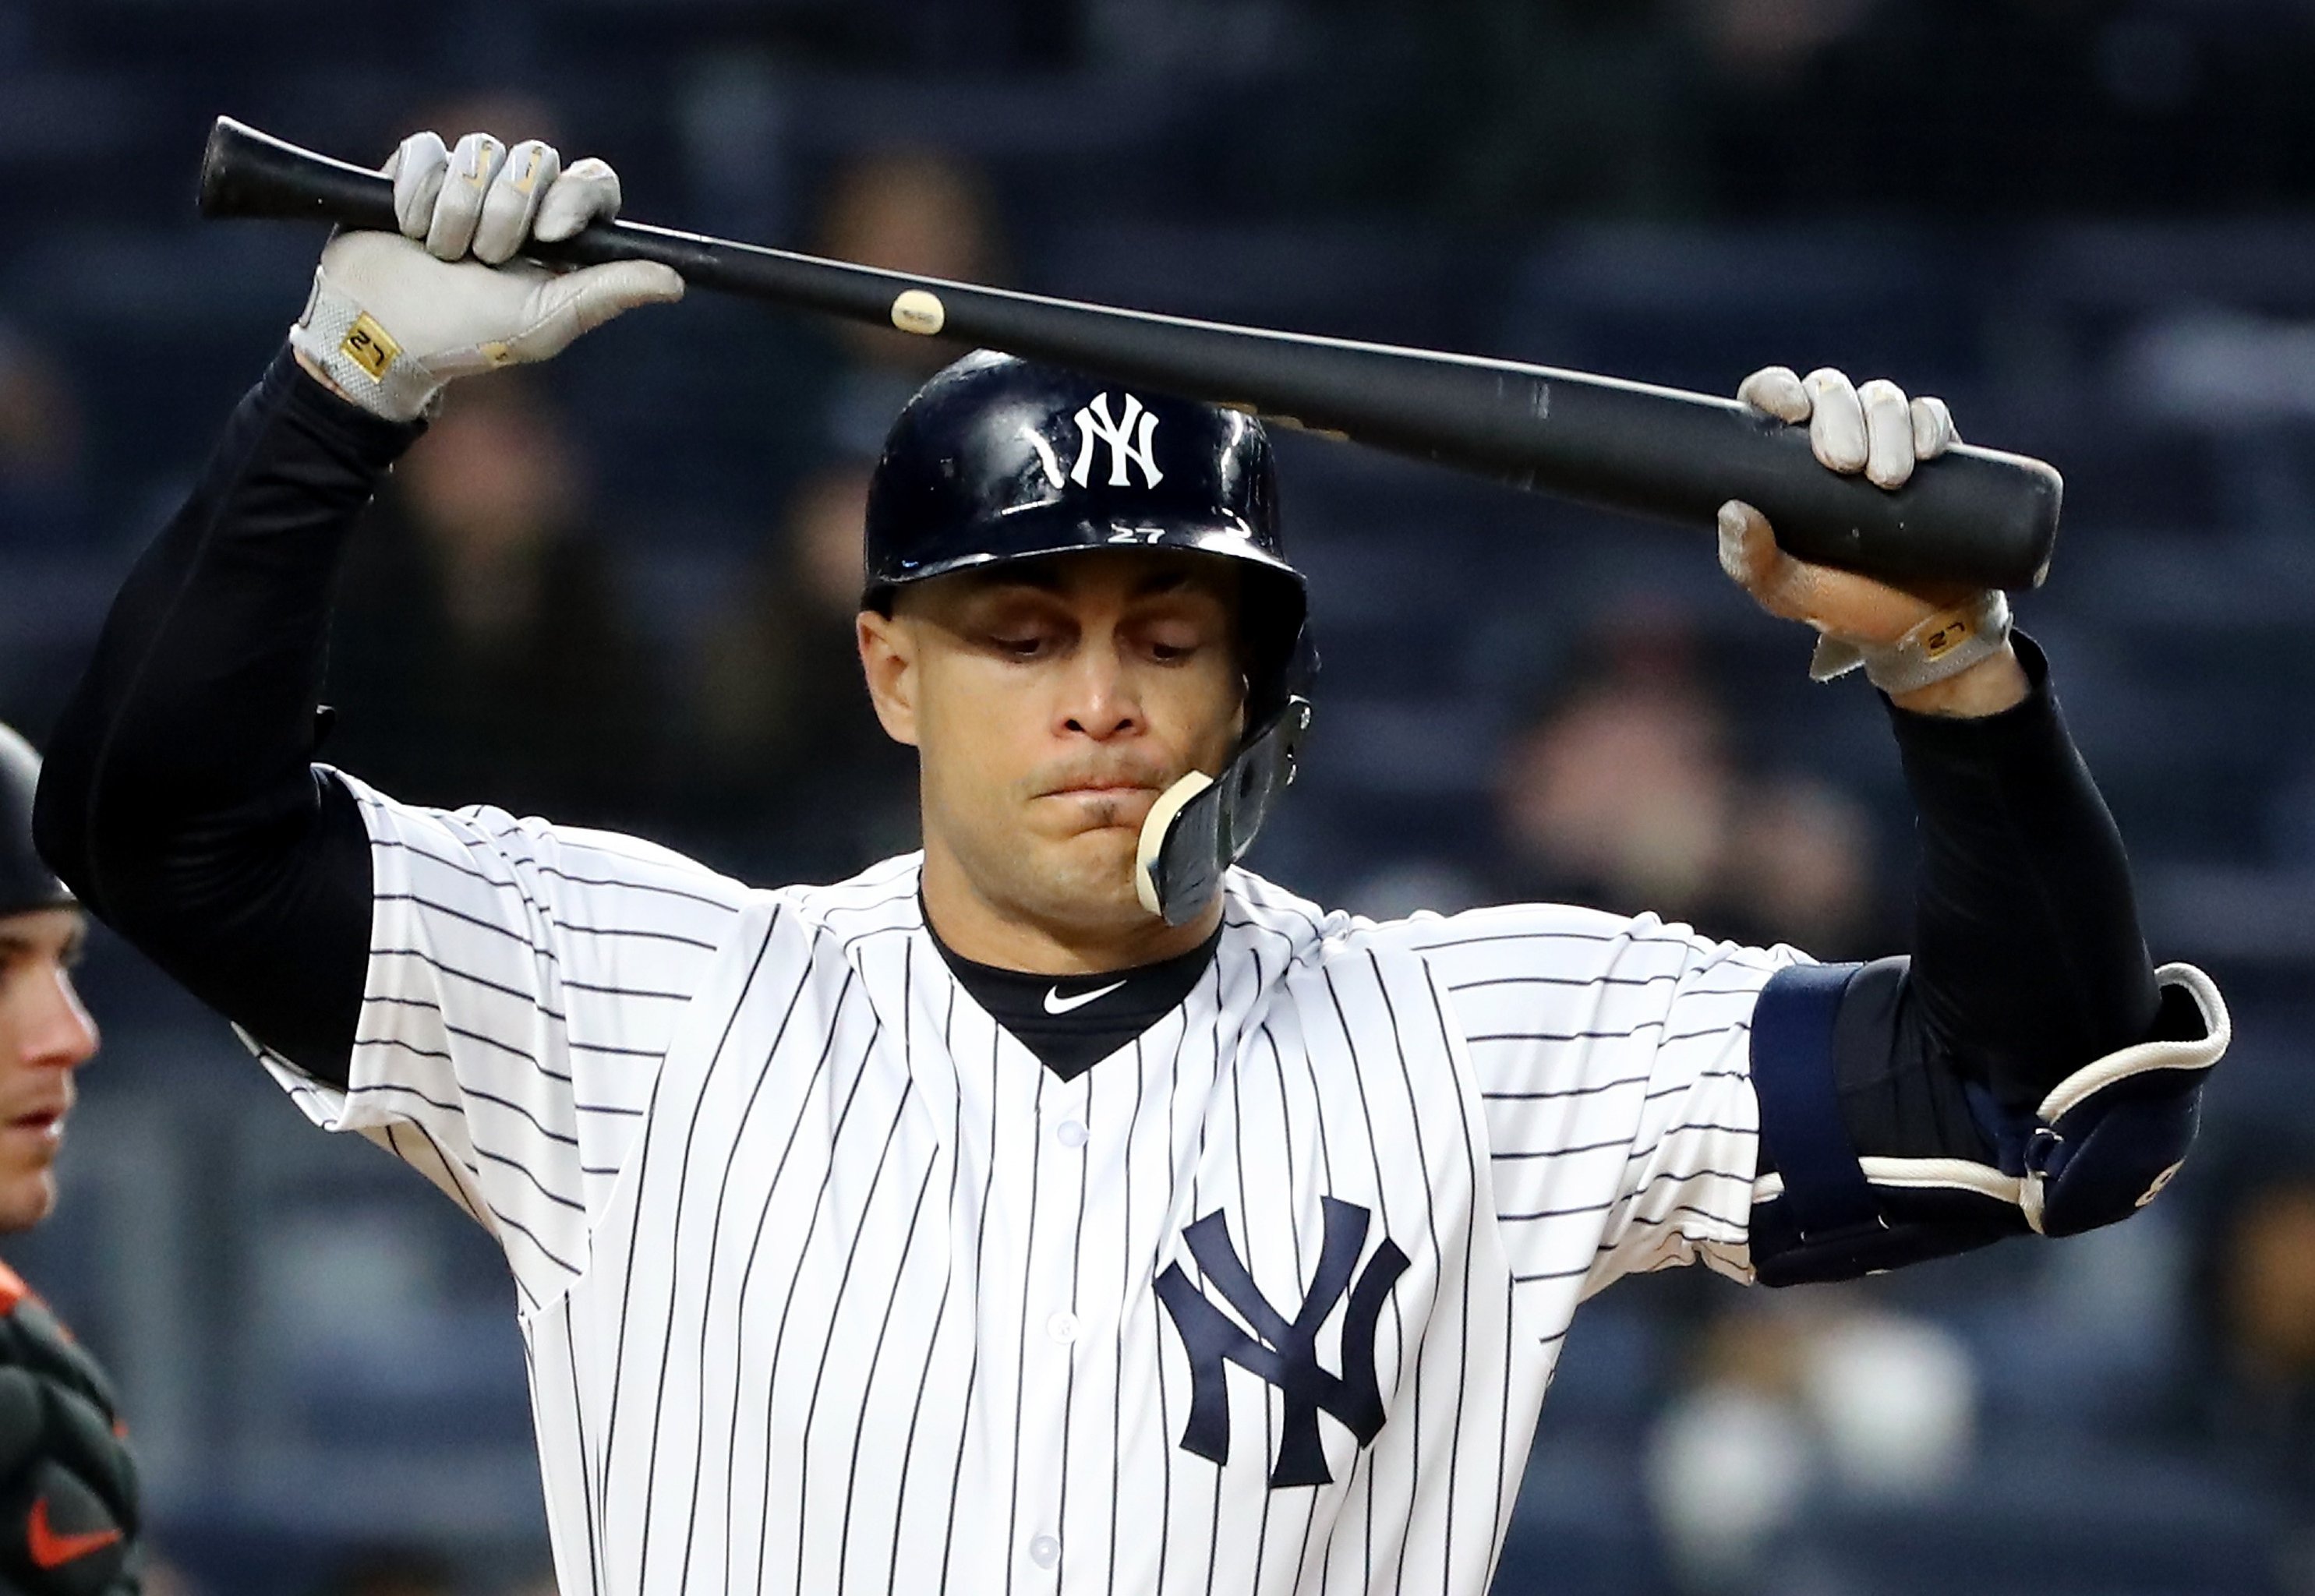 Lupica: Yankees' Aaron Judge is the face of baseball right now